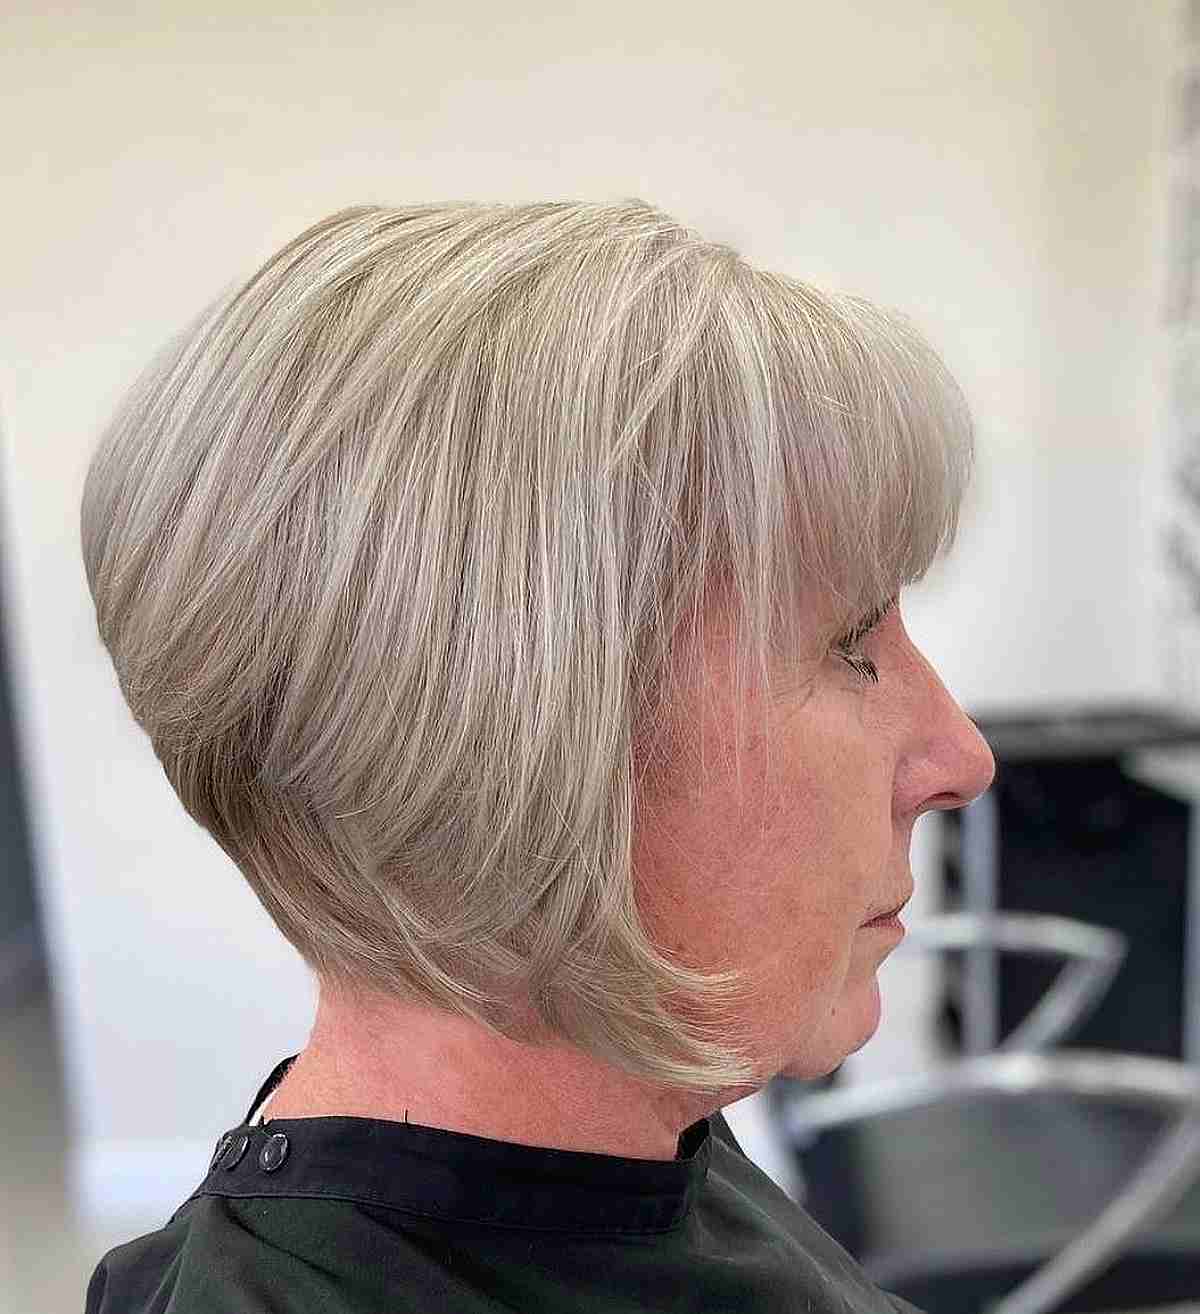 Wedge Cut with Bangs for Older Women with Thin Hair